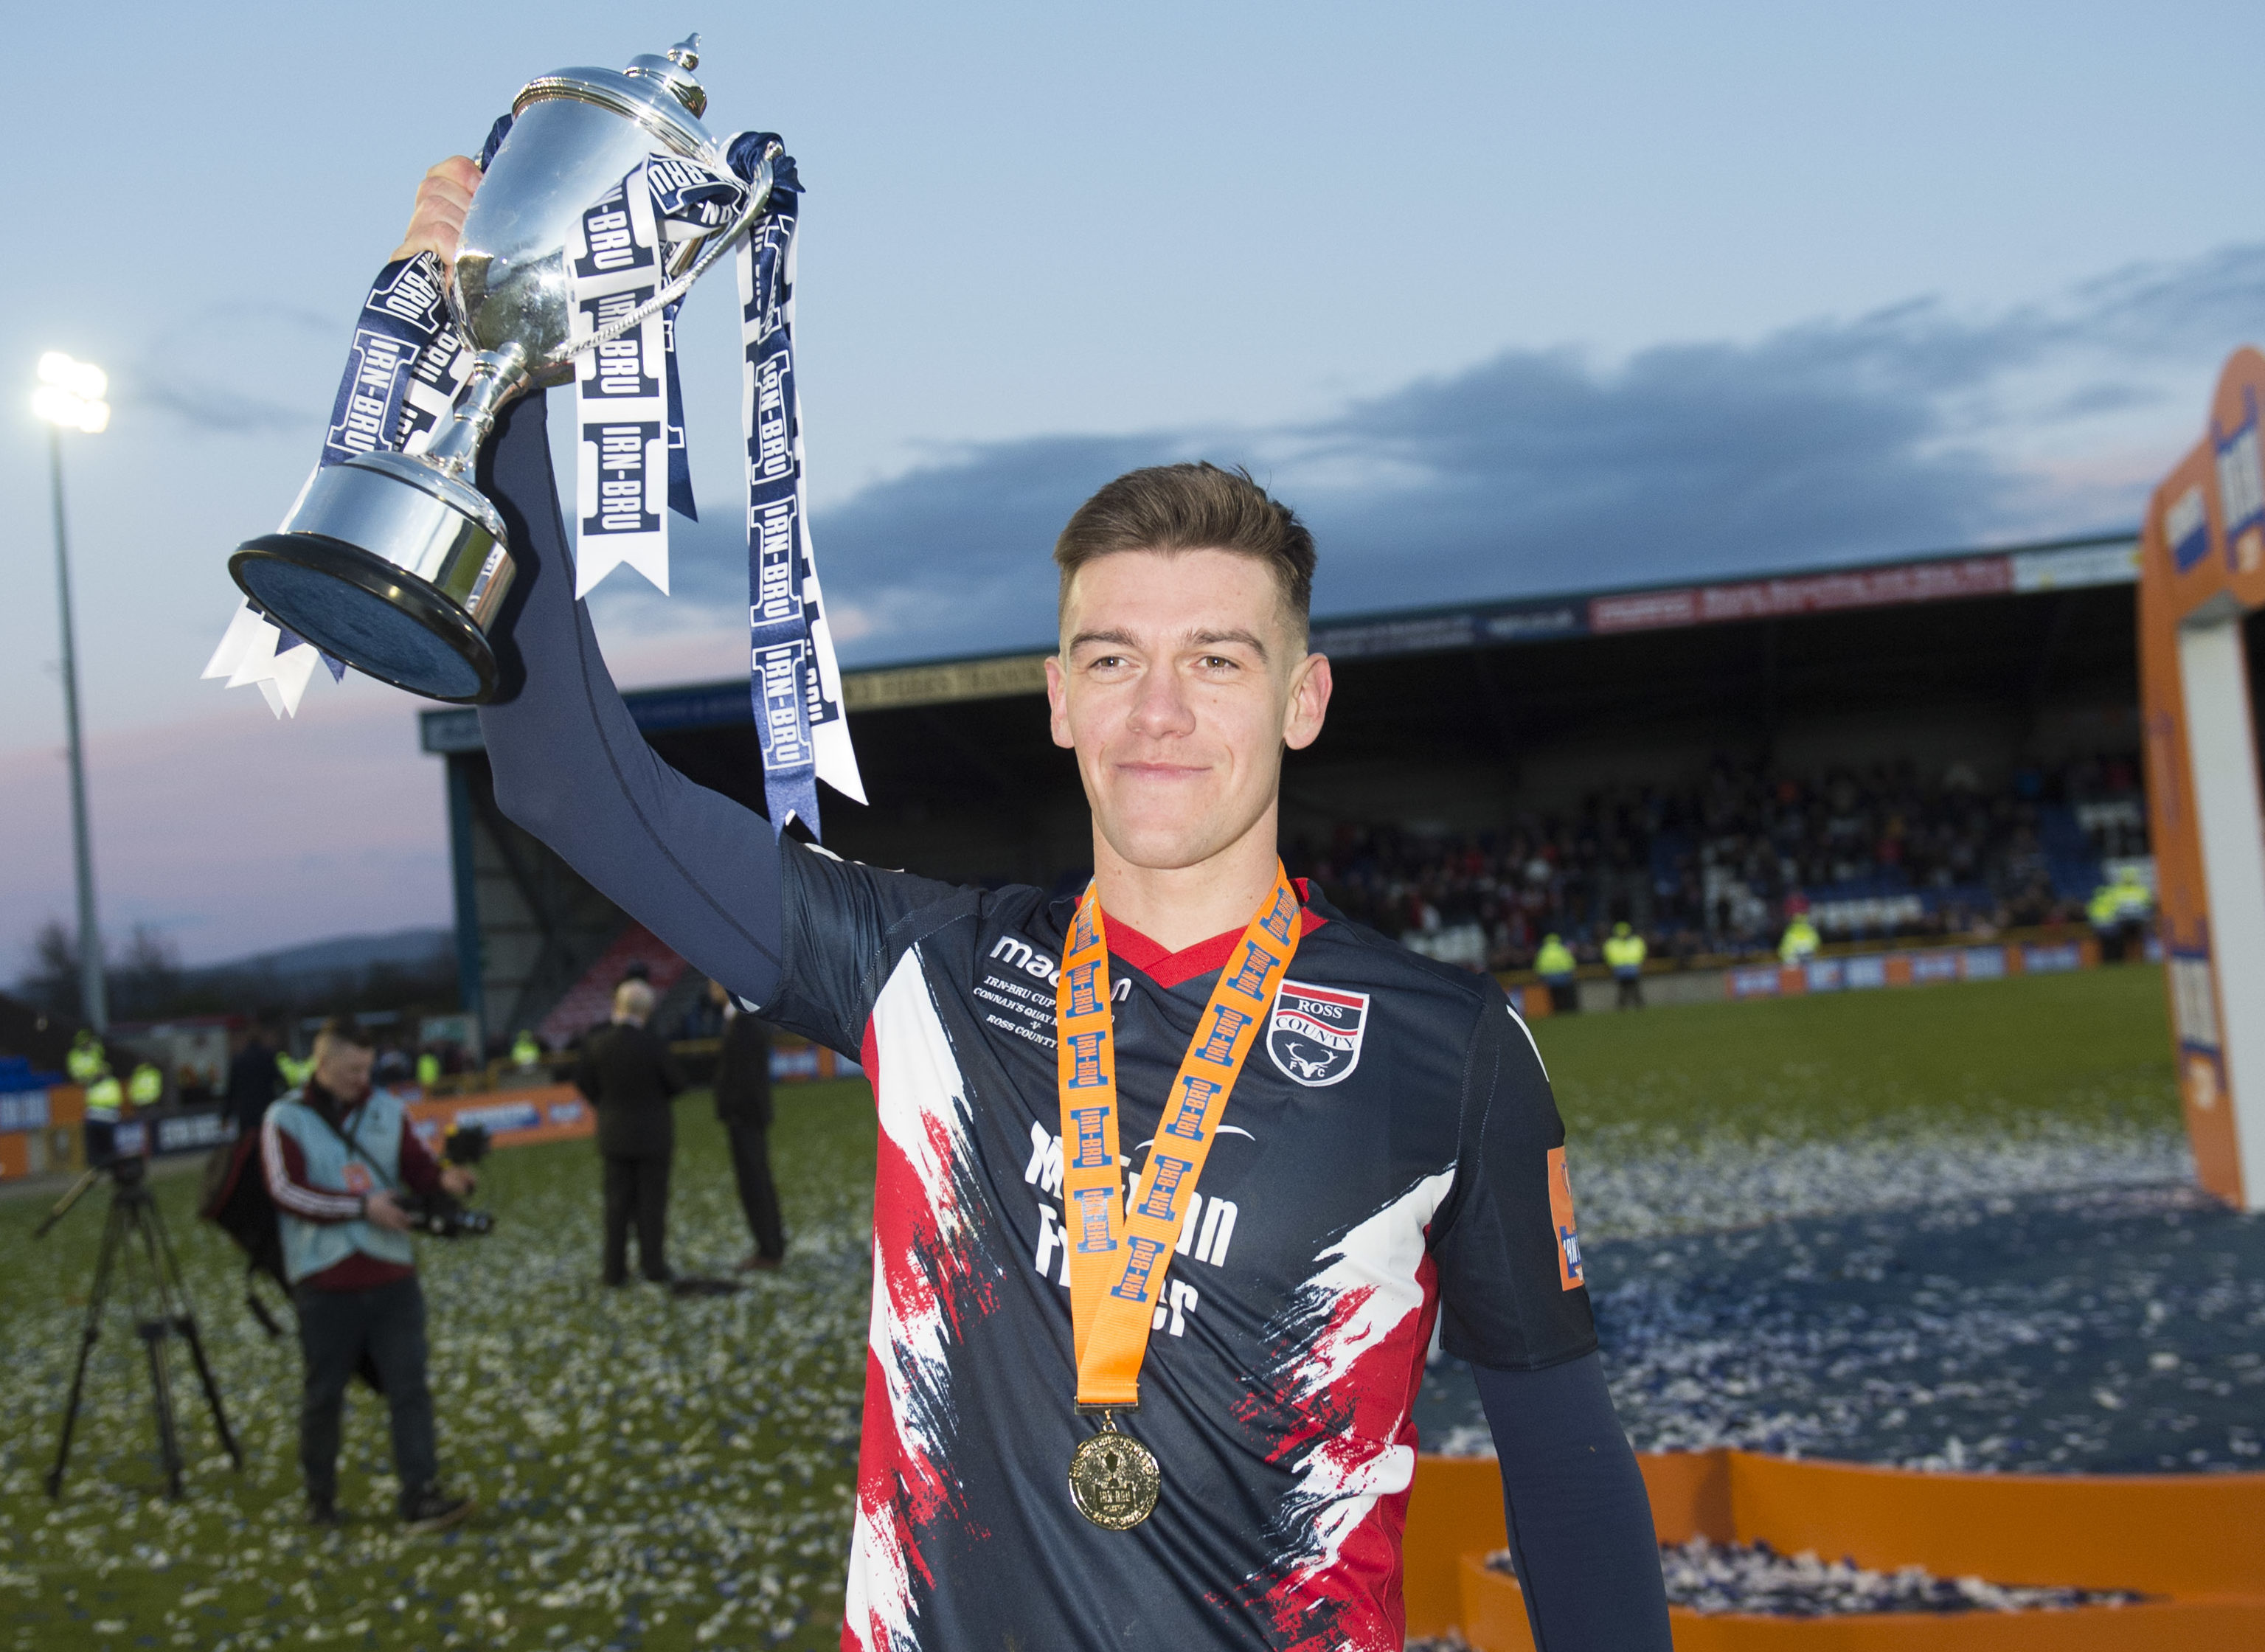 Ross County's Josh Mullin parades the Championship trophy.